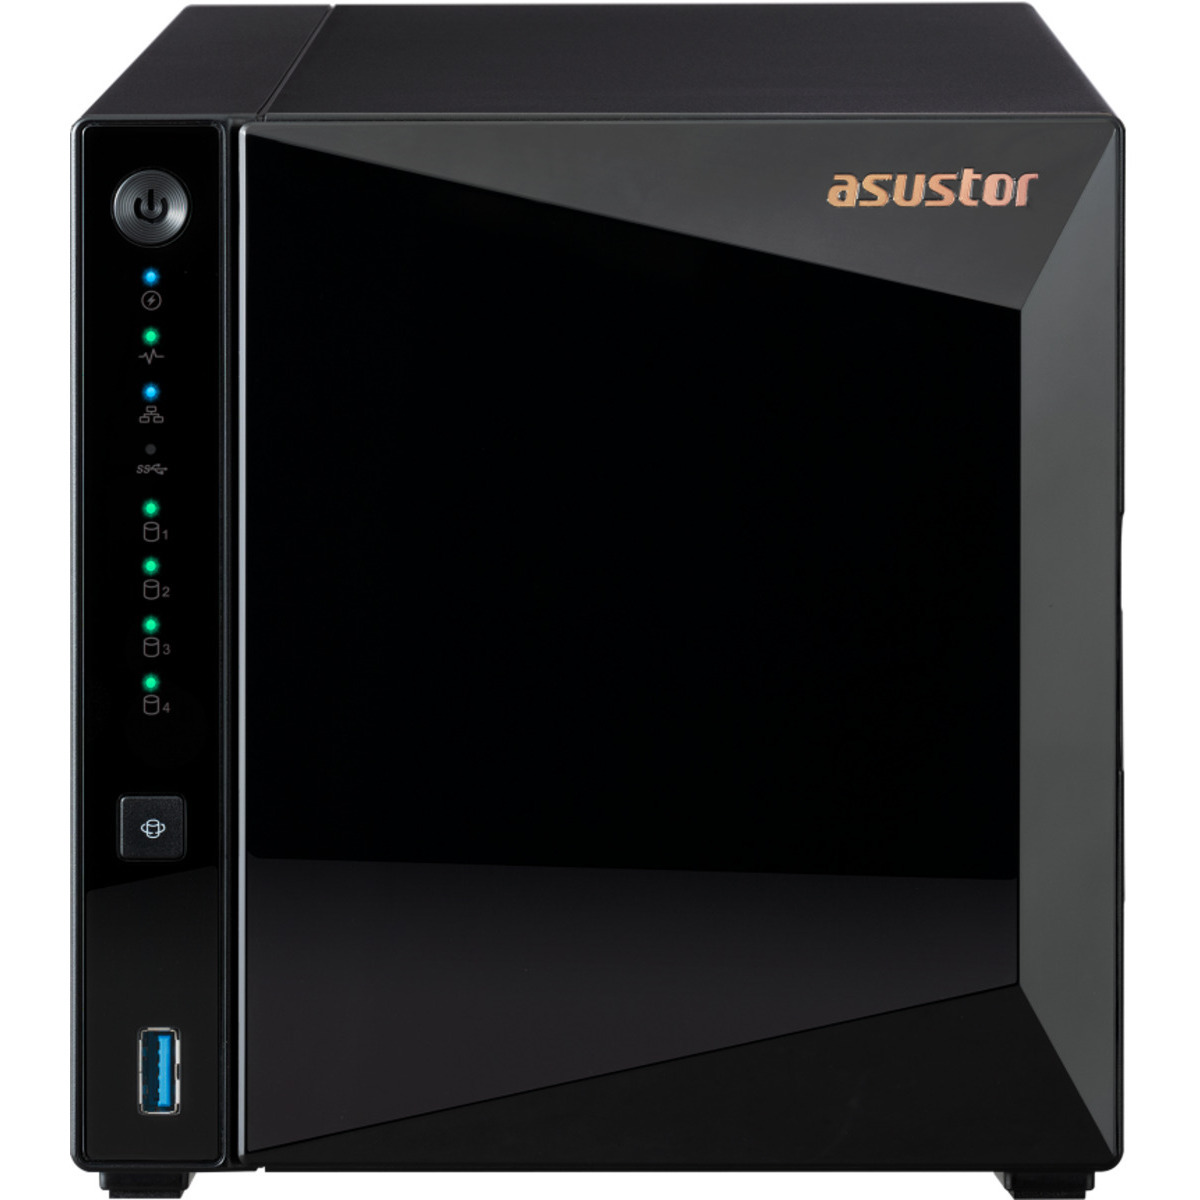 ASUSTOR DRIVESTOR 4 Pro AS3304T 48tb 4-Bay Desktop Personal / Basic Home / Small Office NAS - Network Attached Storage Device 3x16tb Seagate EXOS X18 ST16000NM000J 3.5 7200rpm SATA 6Gb/s HDD ENTERPRISE Class Drives Installed - Burn-In Tested DRIVESTOR 4 Pro AS3304T